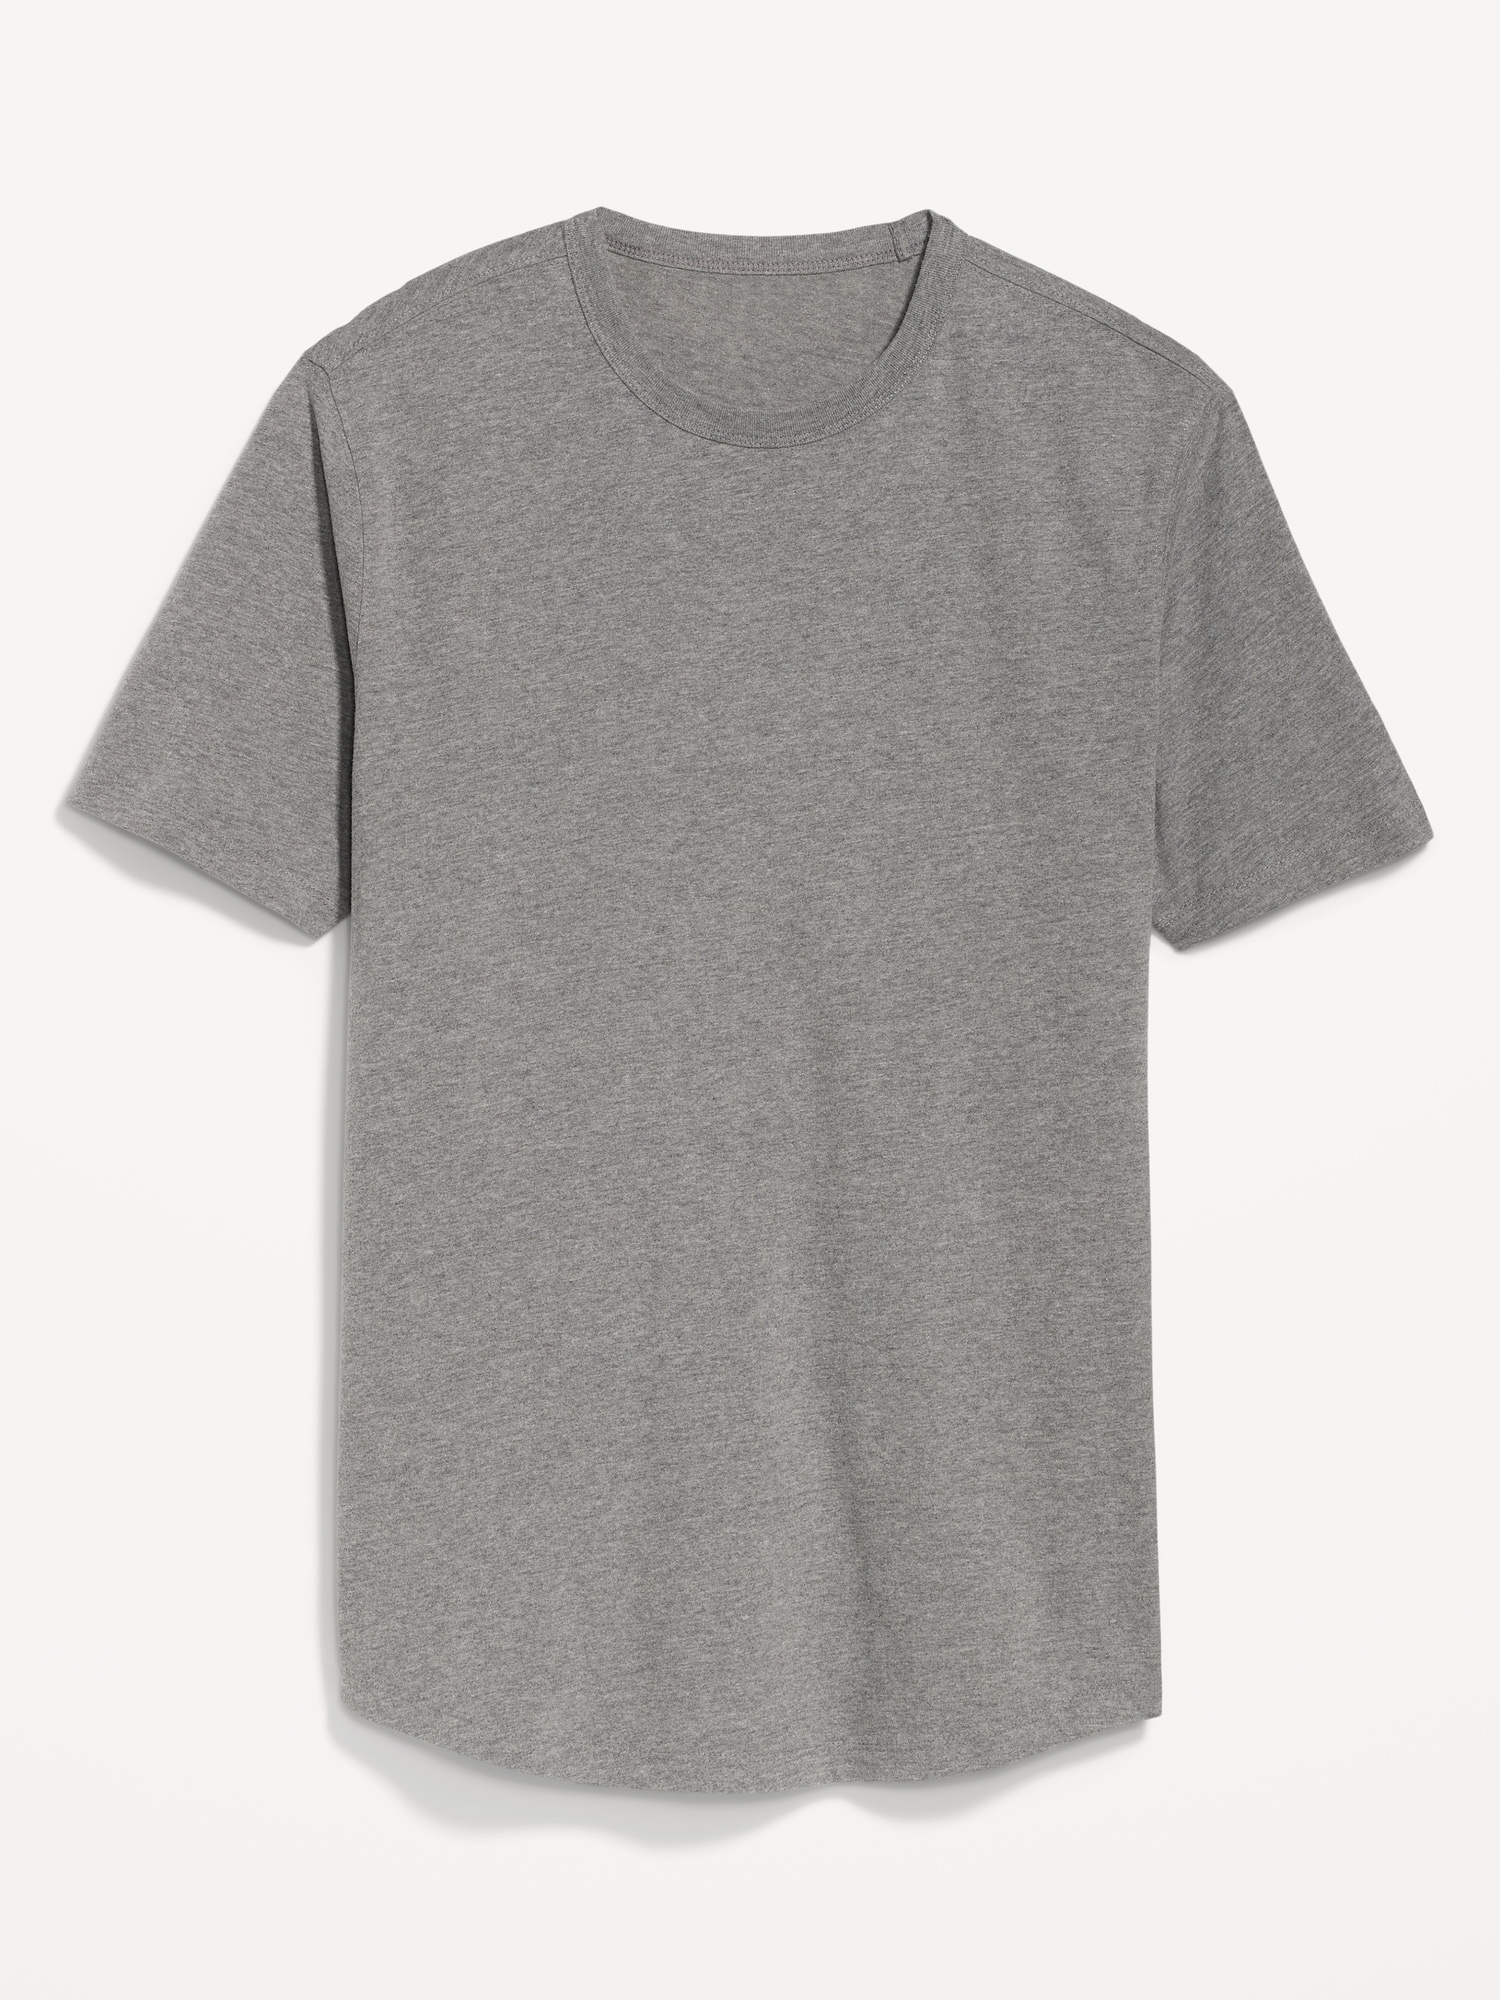 Old Navy Soft-Washed Curved-Hem T-Shirt gray. 1